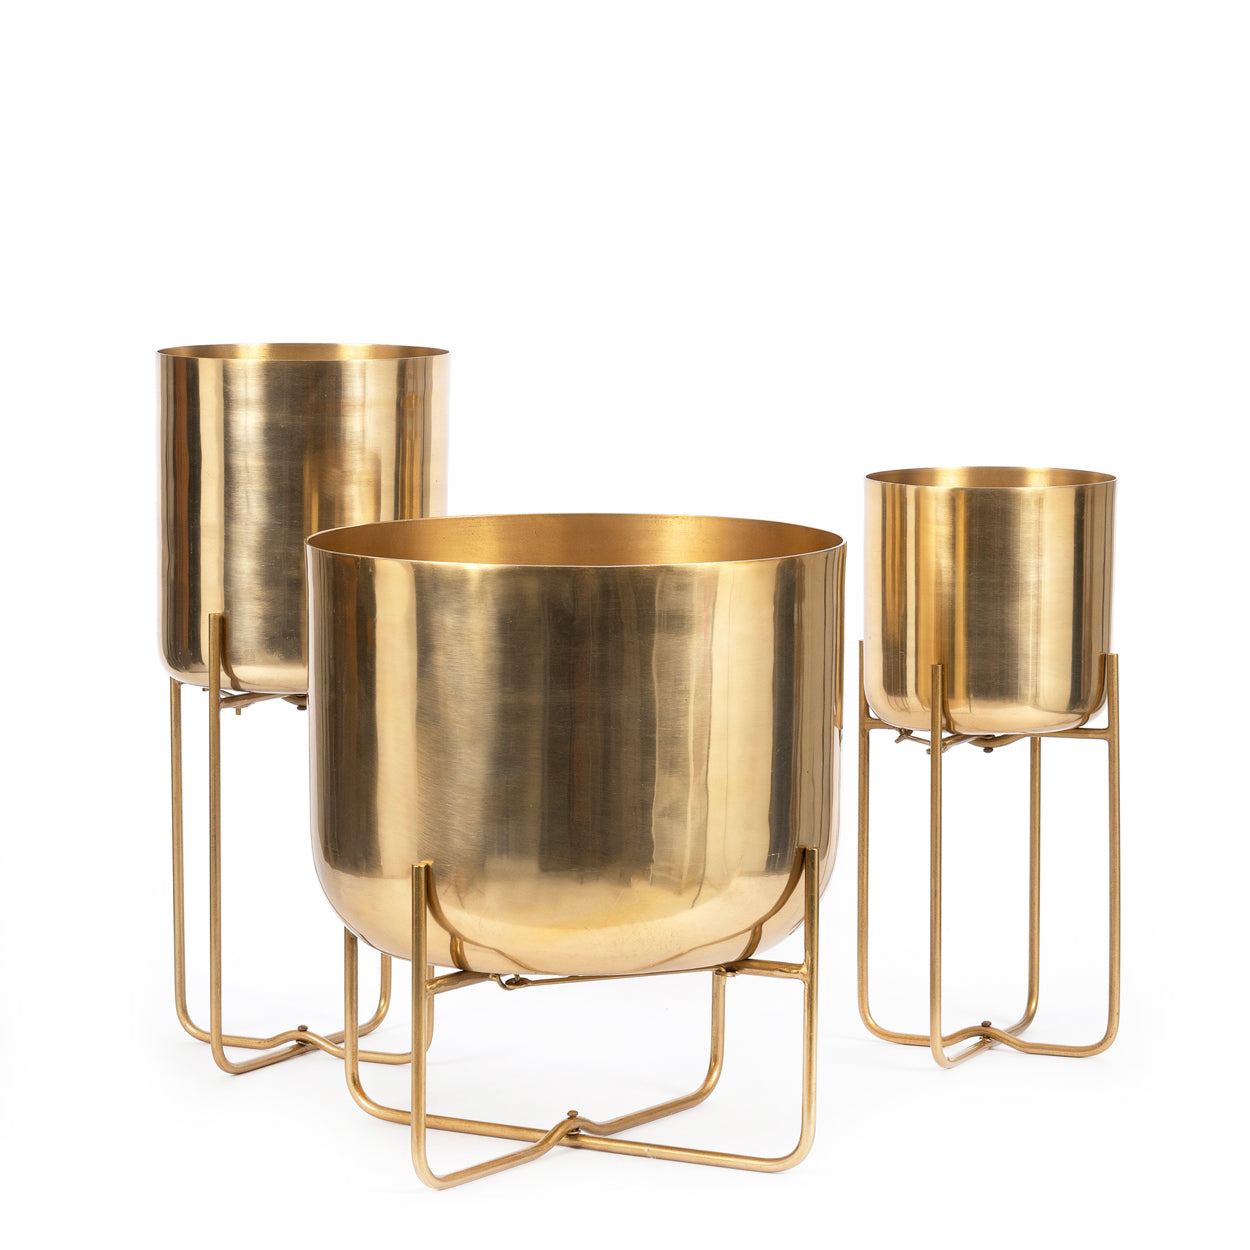 THE BRASS Planter On Stand set of three